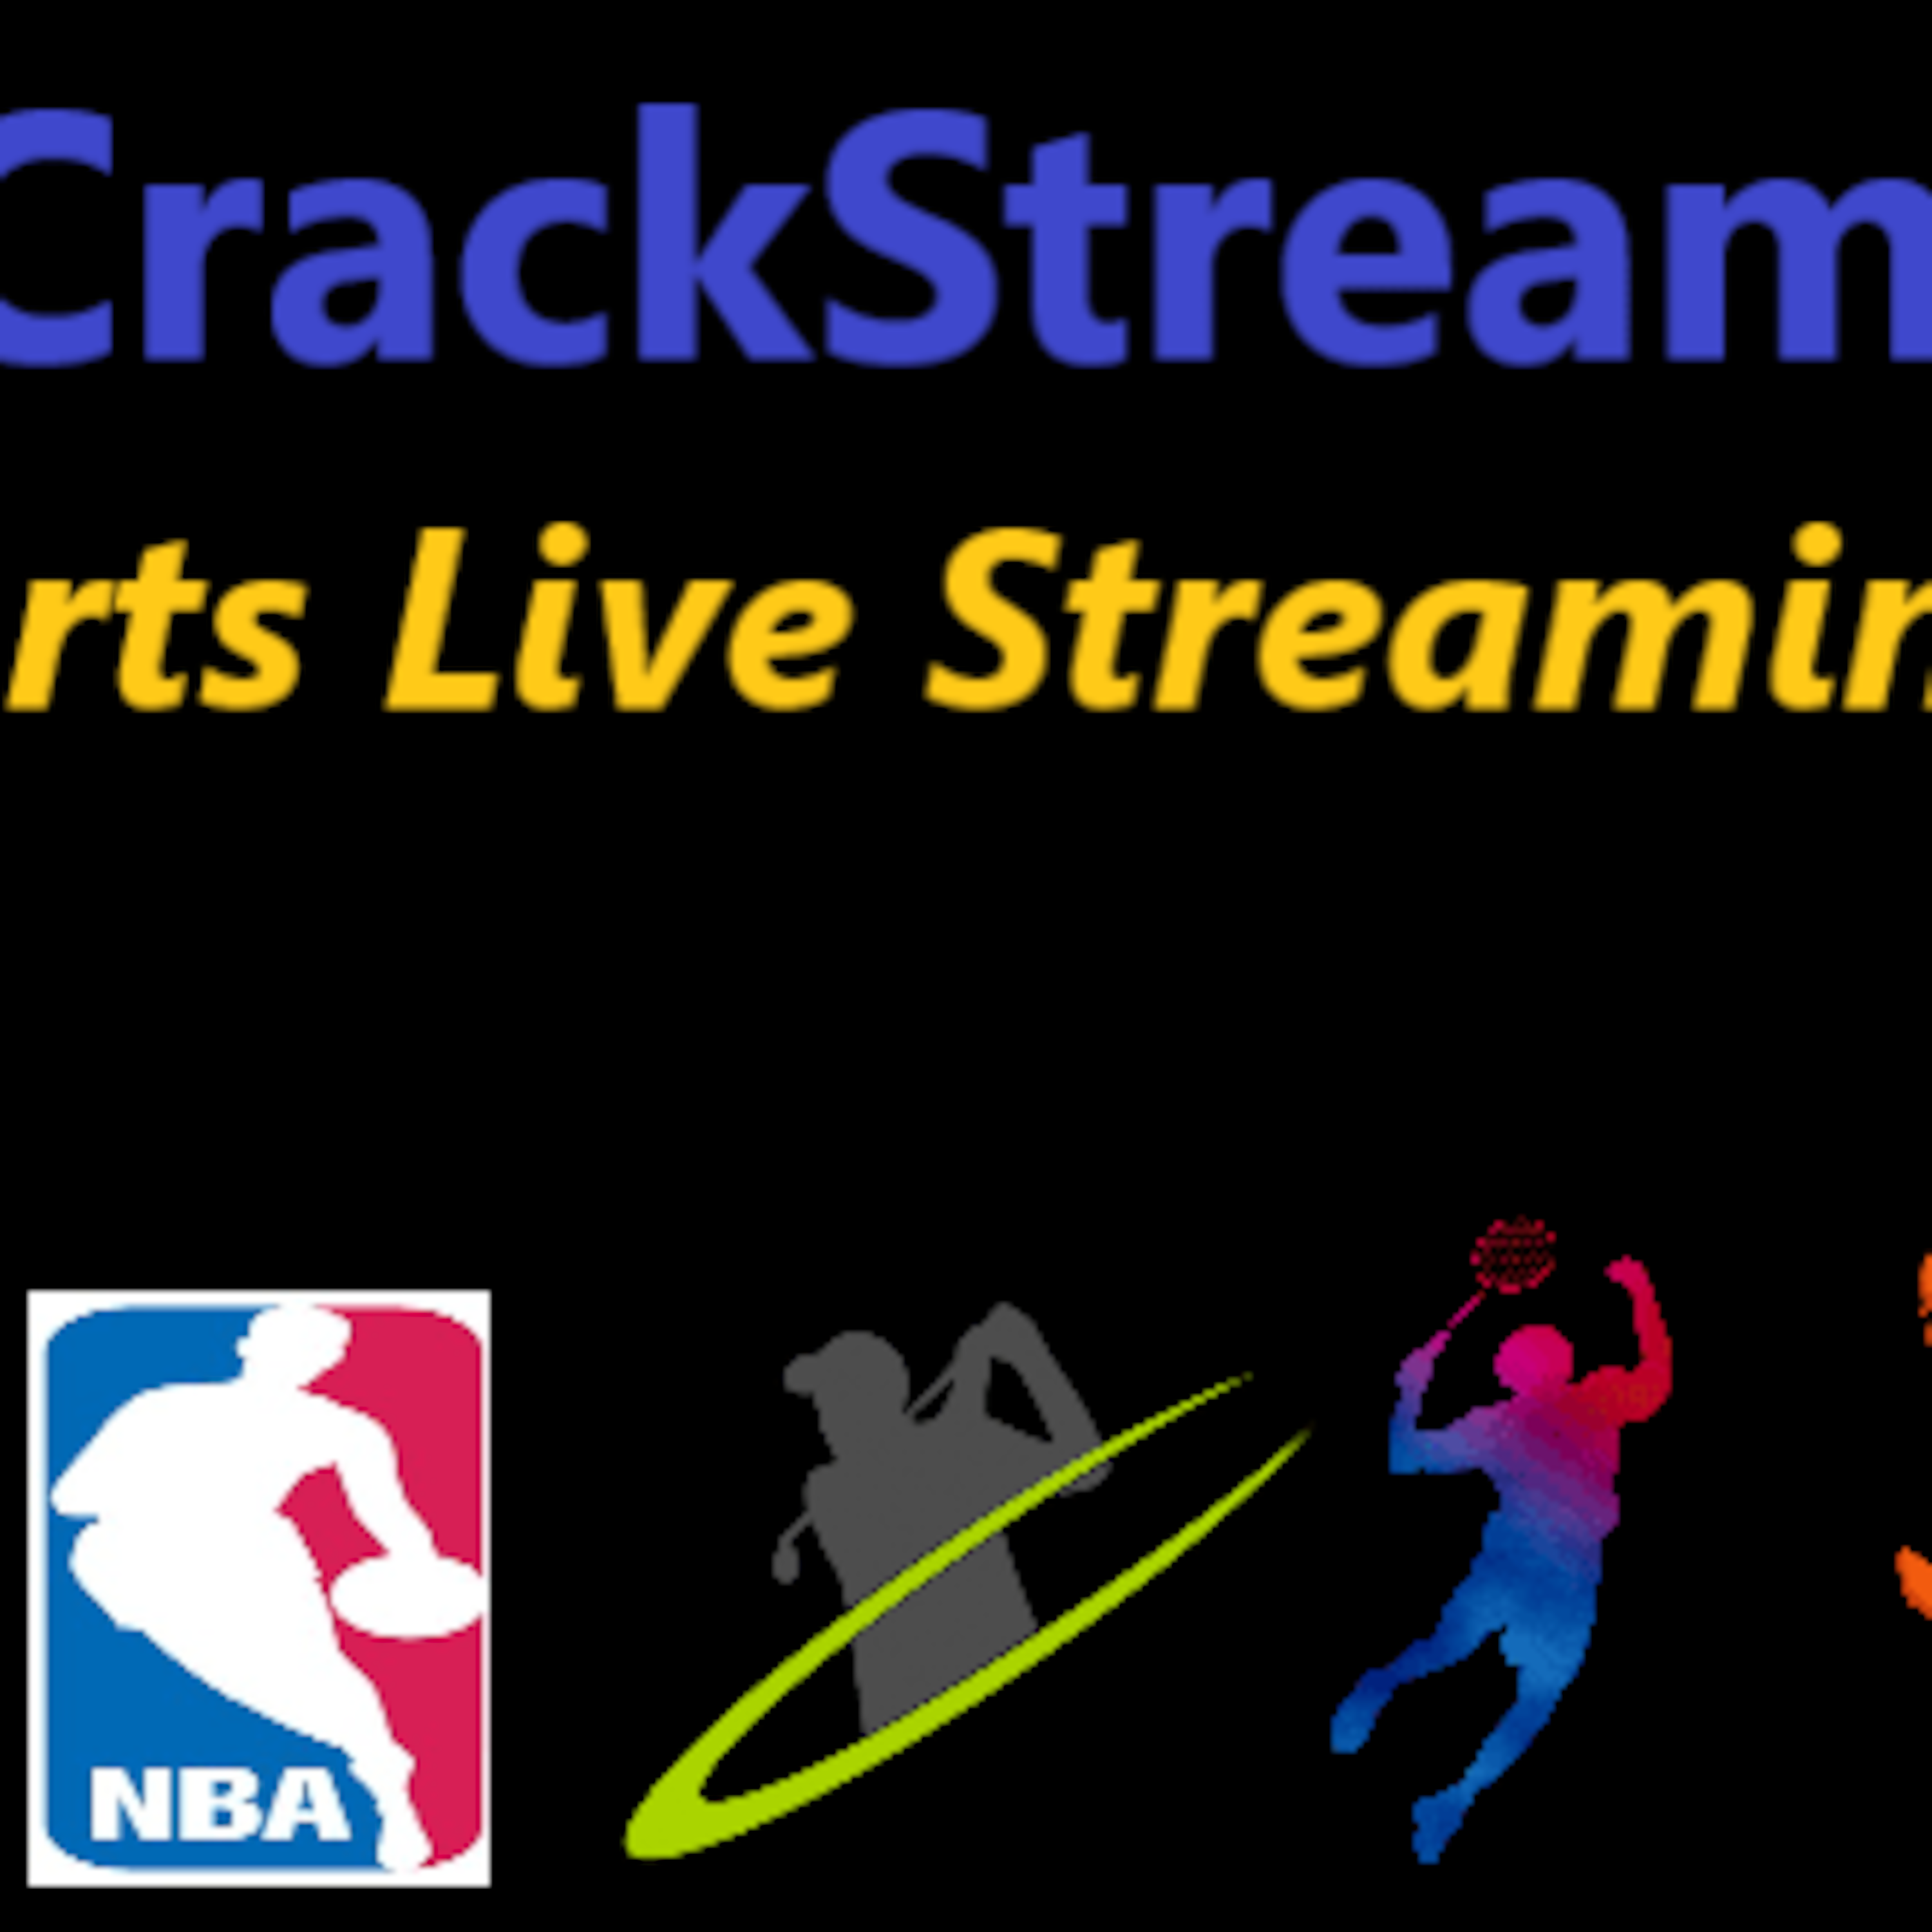 Episode 166: Crackstreams - Watch HD Sports Now On Fire Stick Or Android